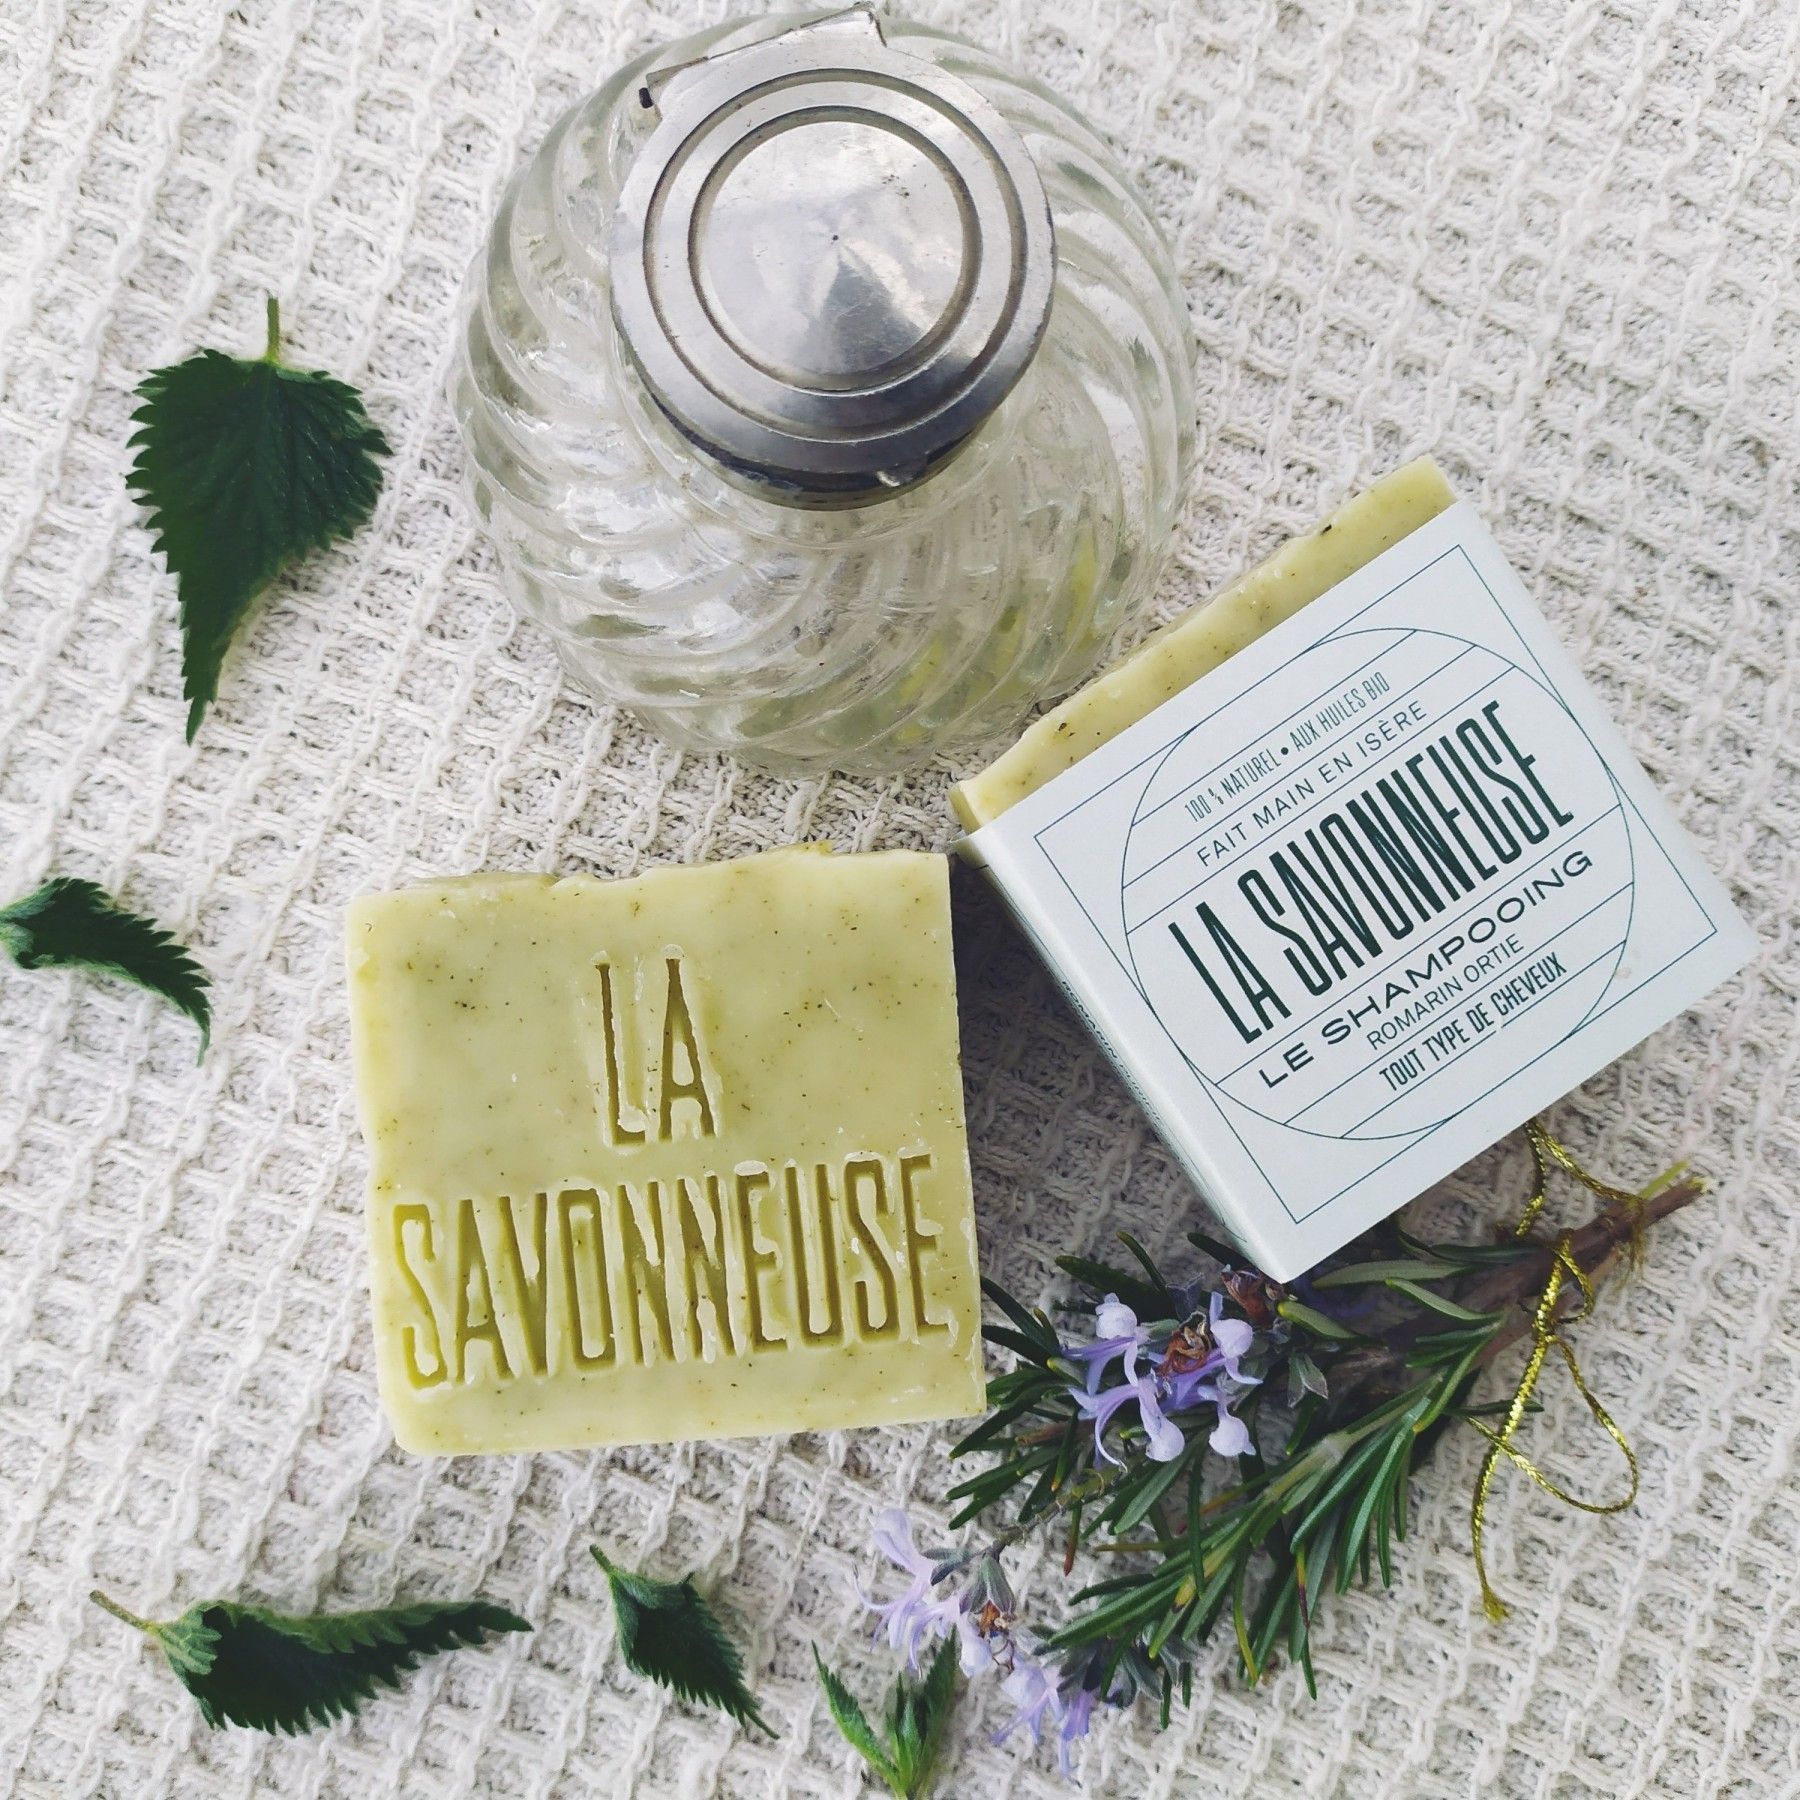 Shampoing solide by La Savonneuse - 100 g